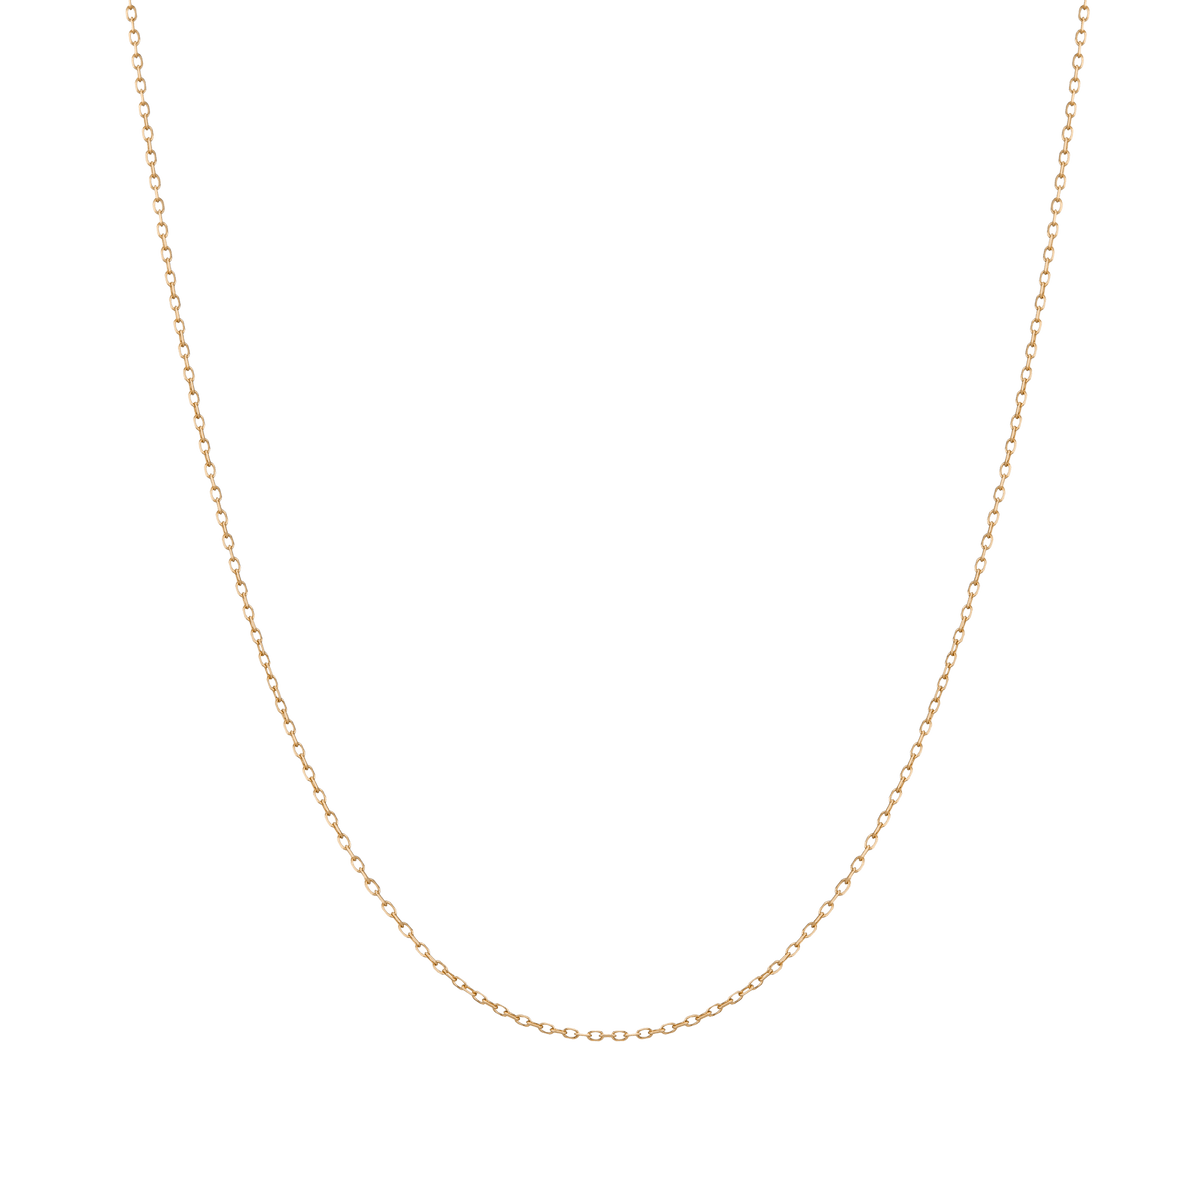 Most popular types of gold chains - DiamondNet